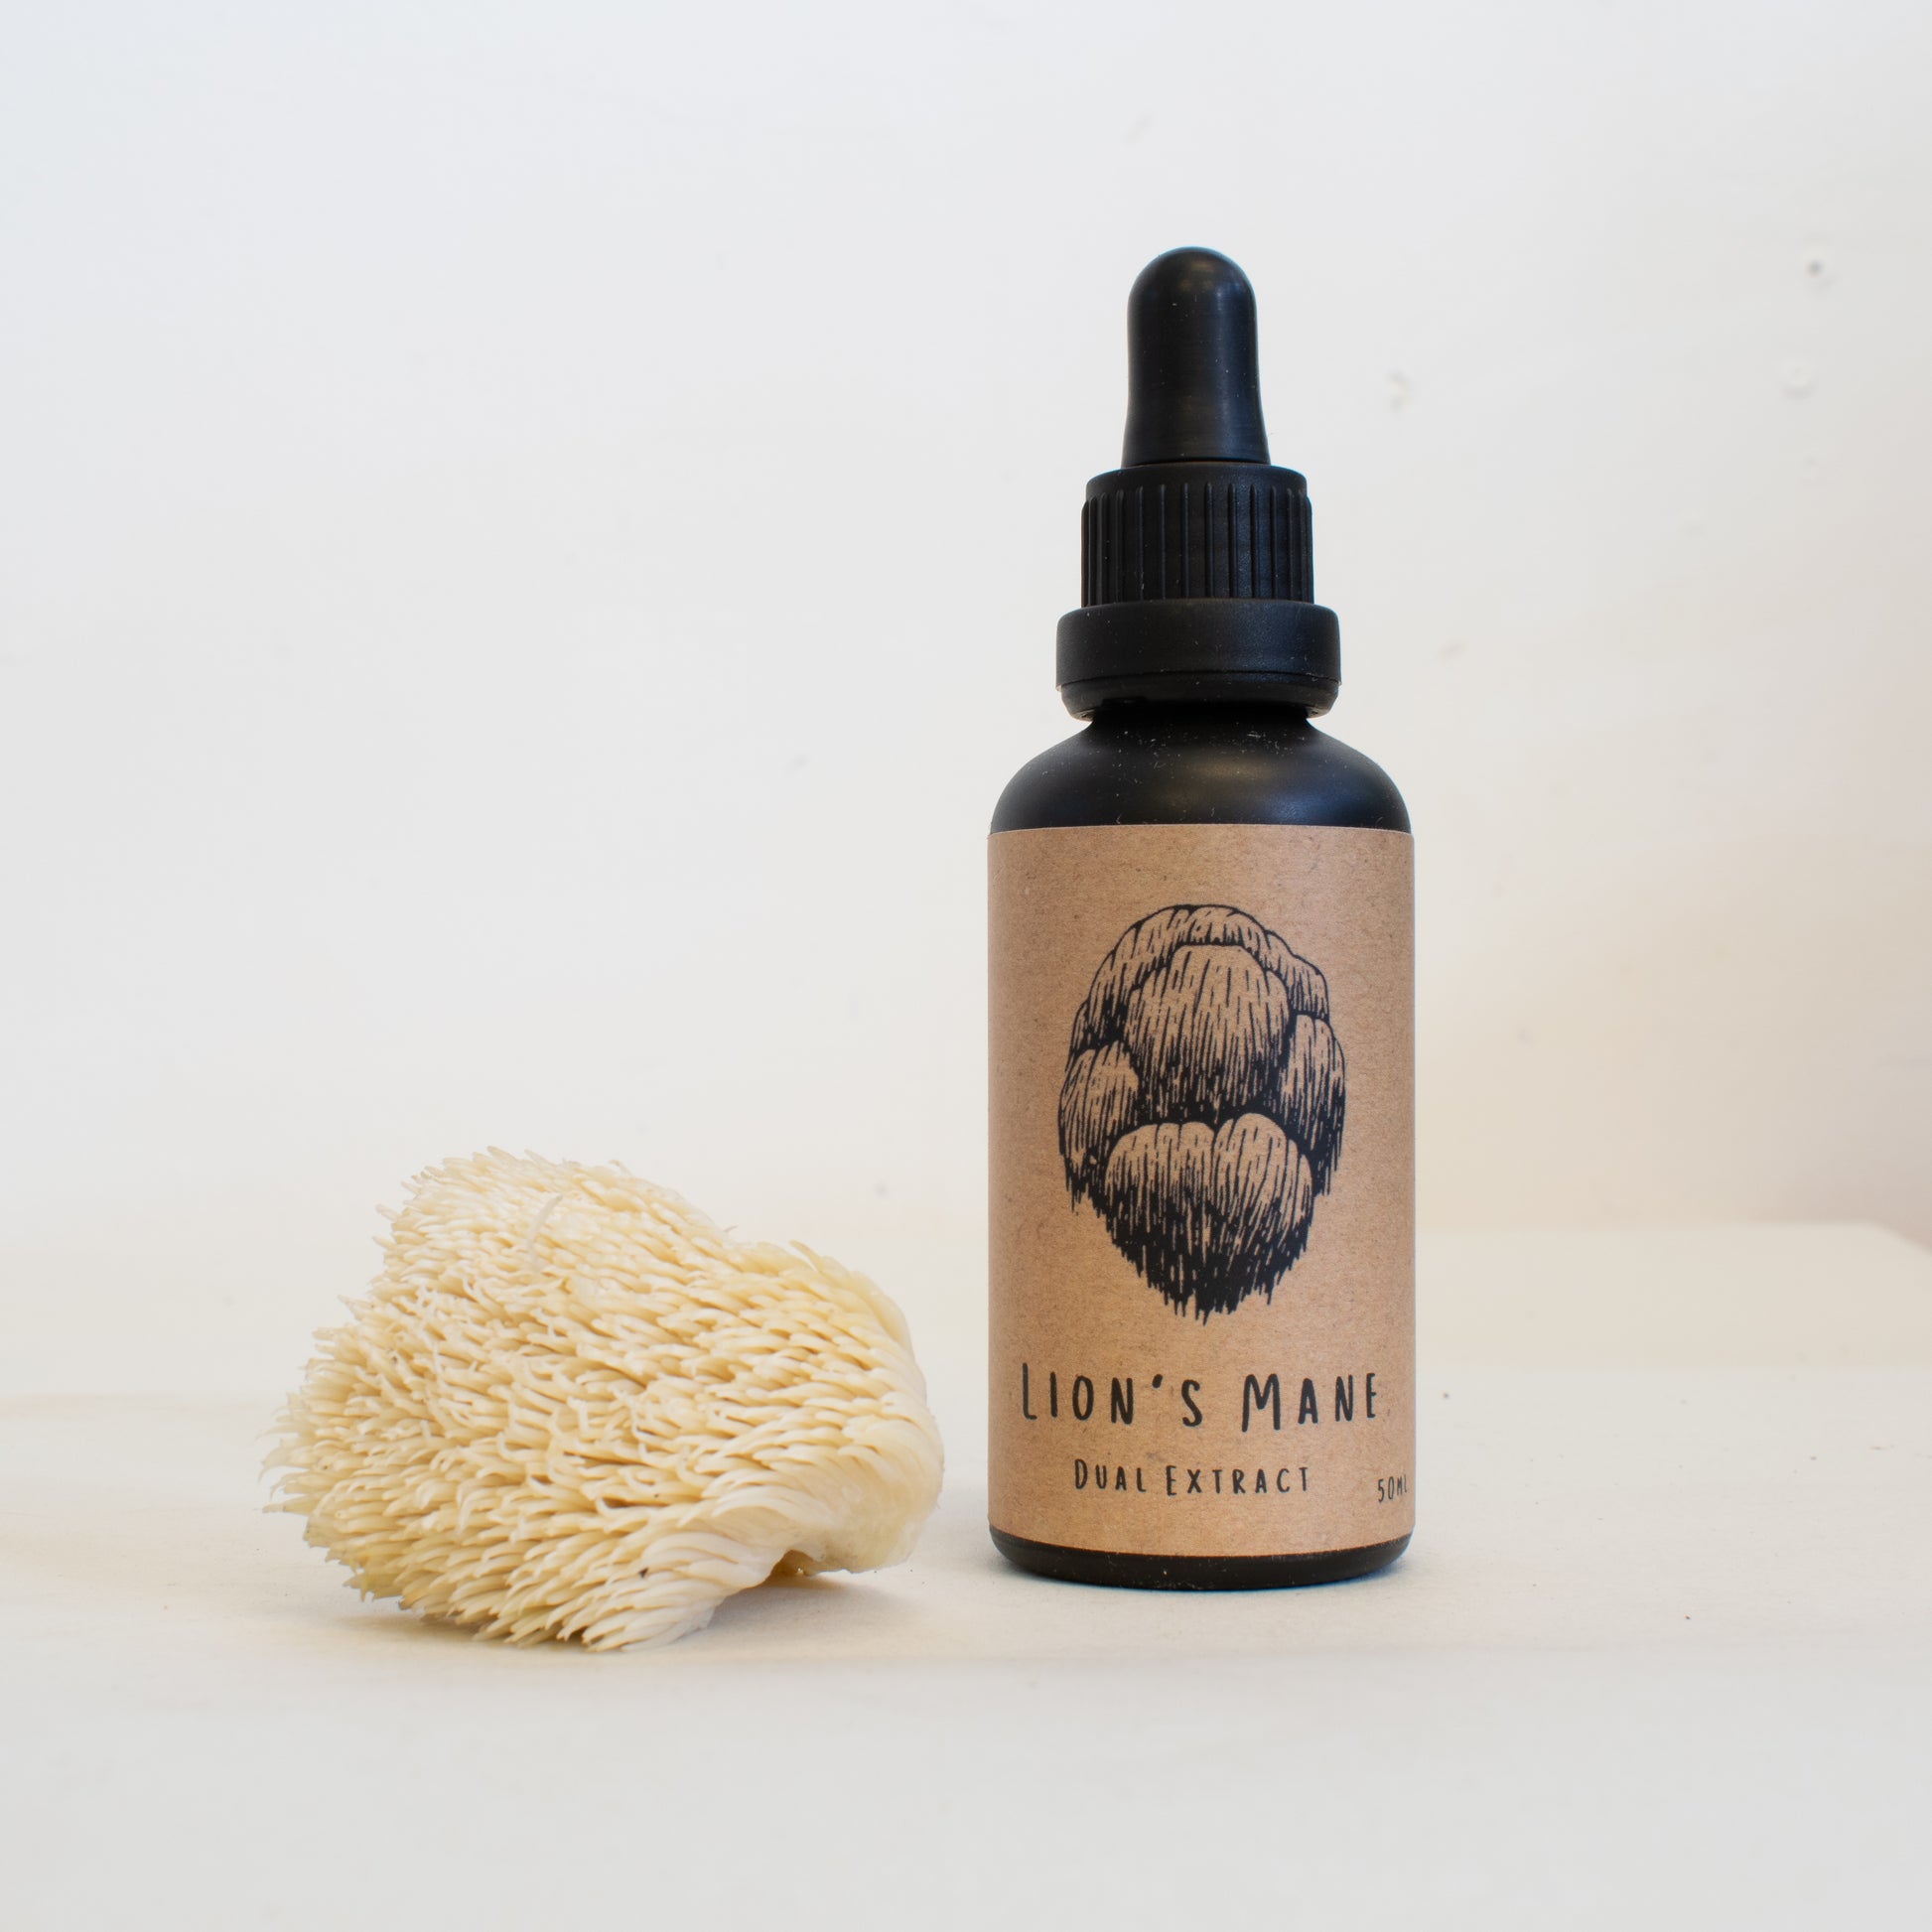 Lion's mane dual-extract tincture made by Fat Fox Mushrooms.